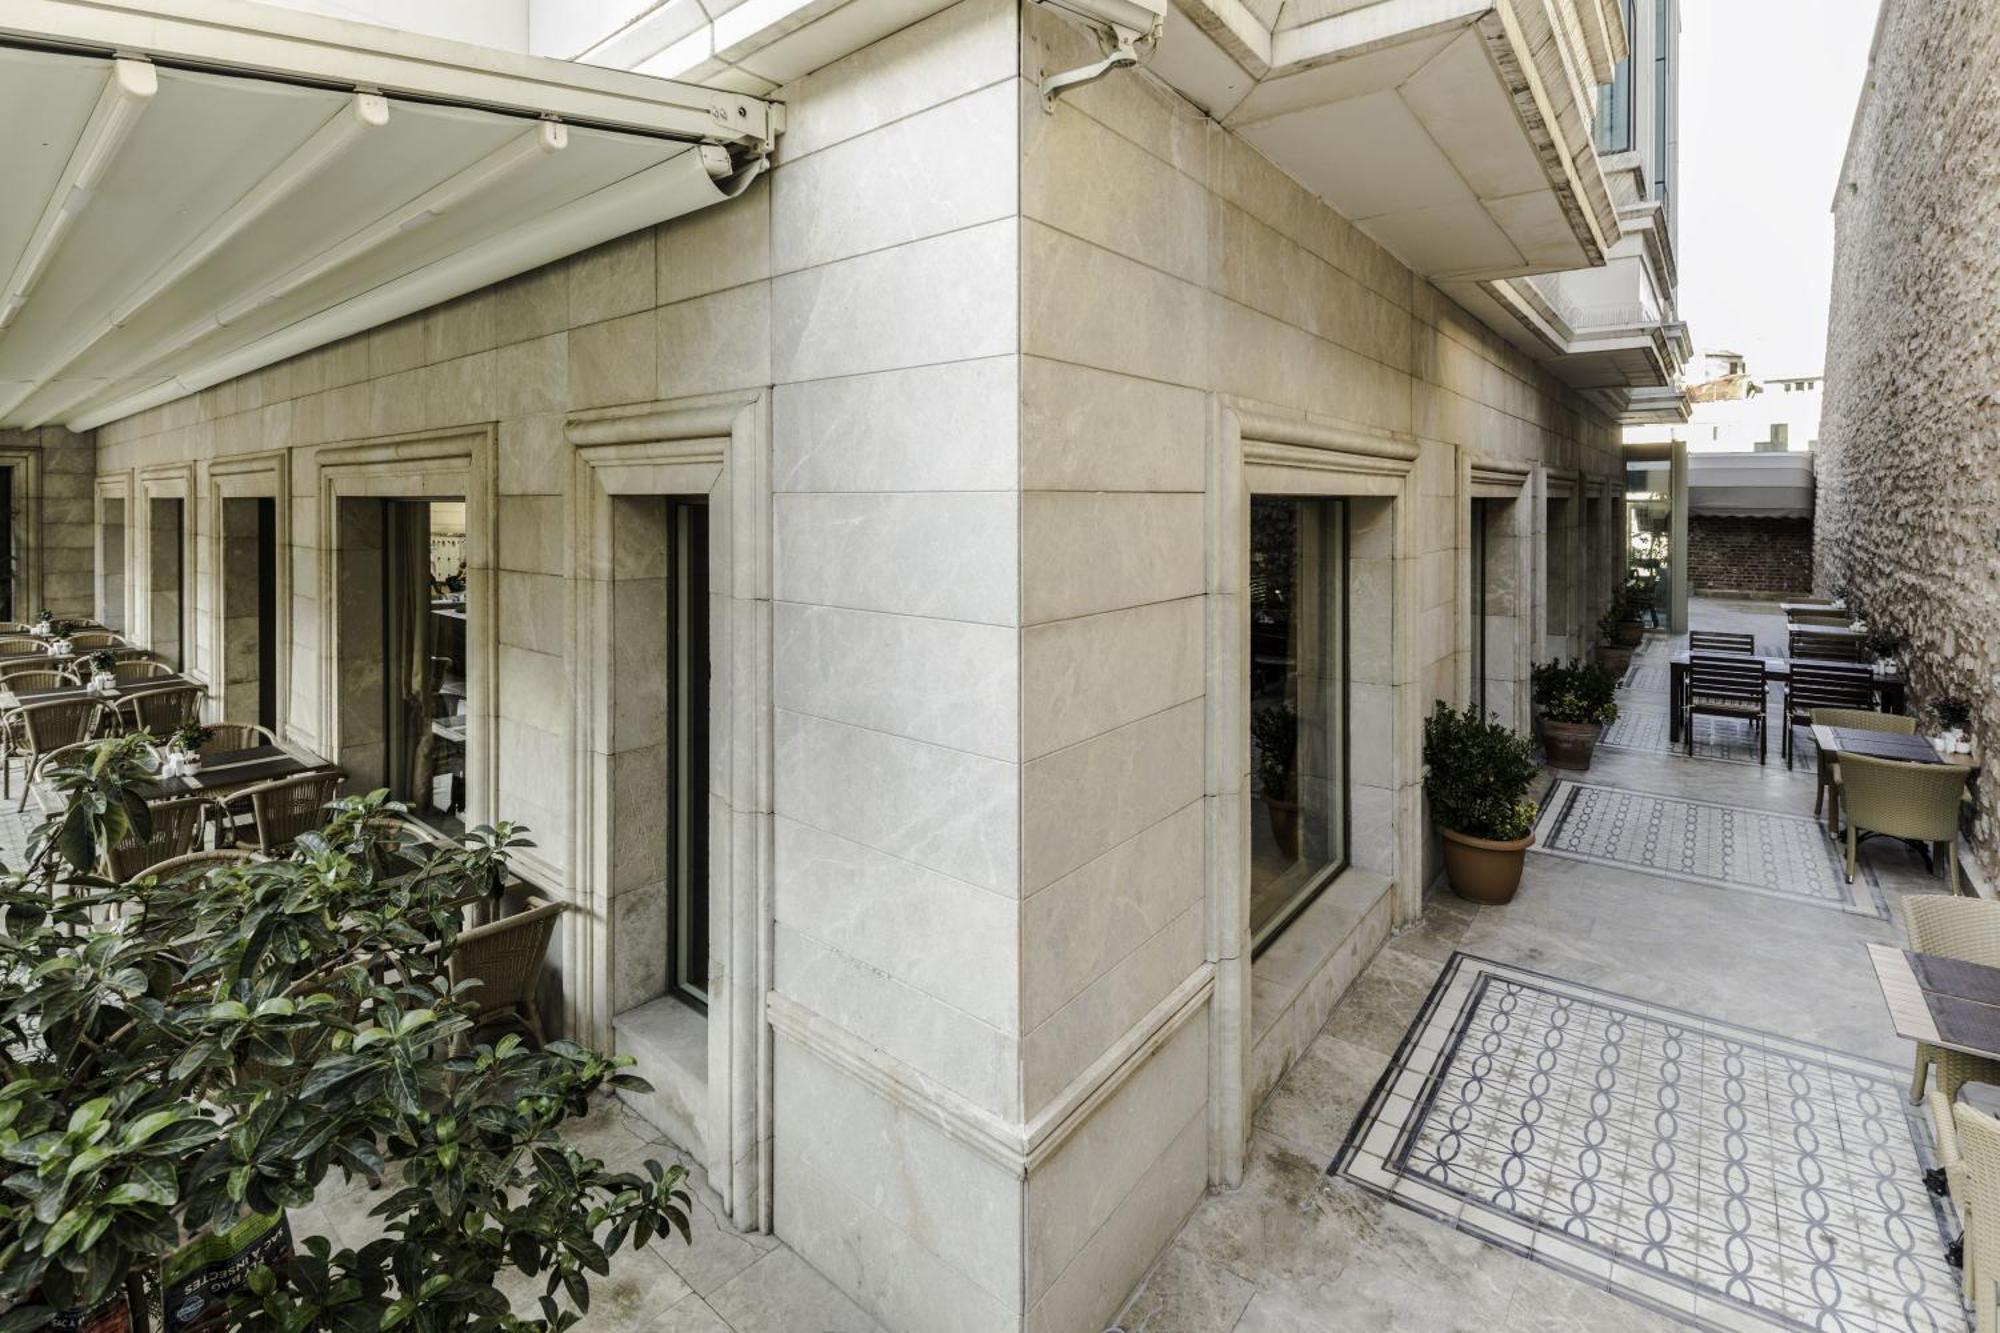 Levni Hotel & SPA - Special Category Istanbul Exterior foto